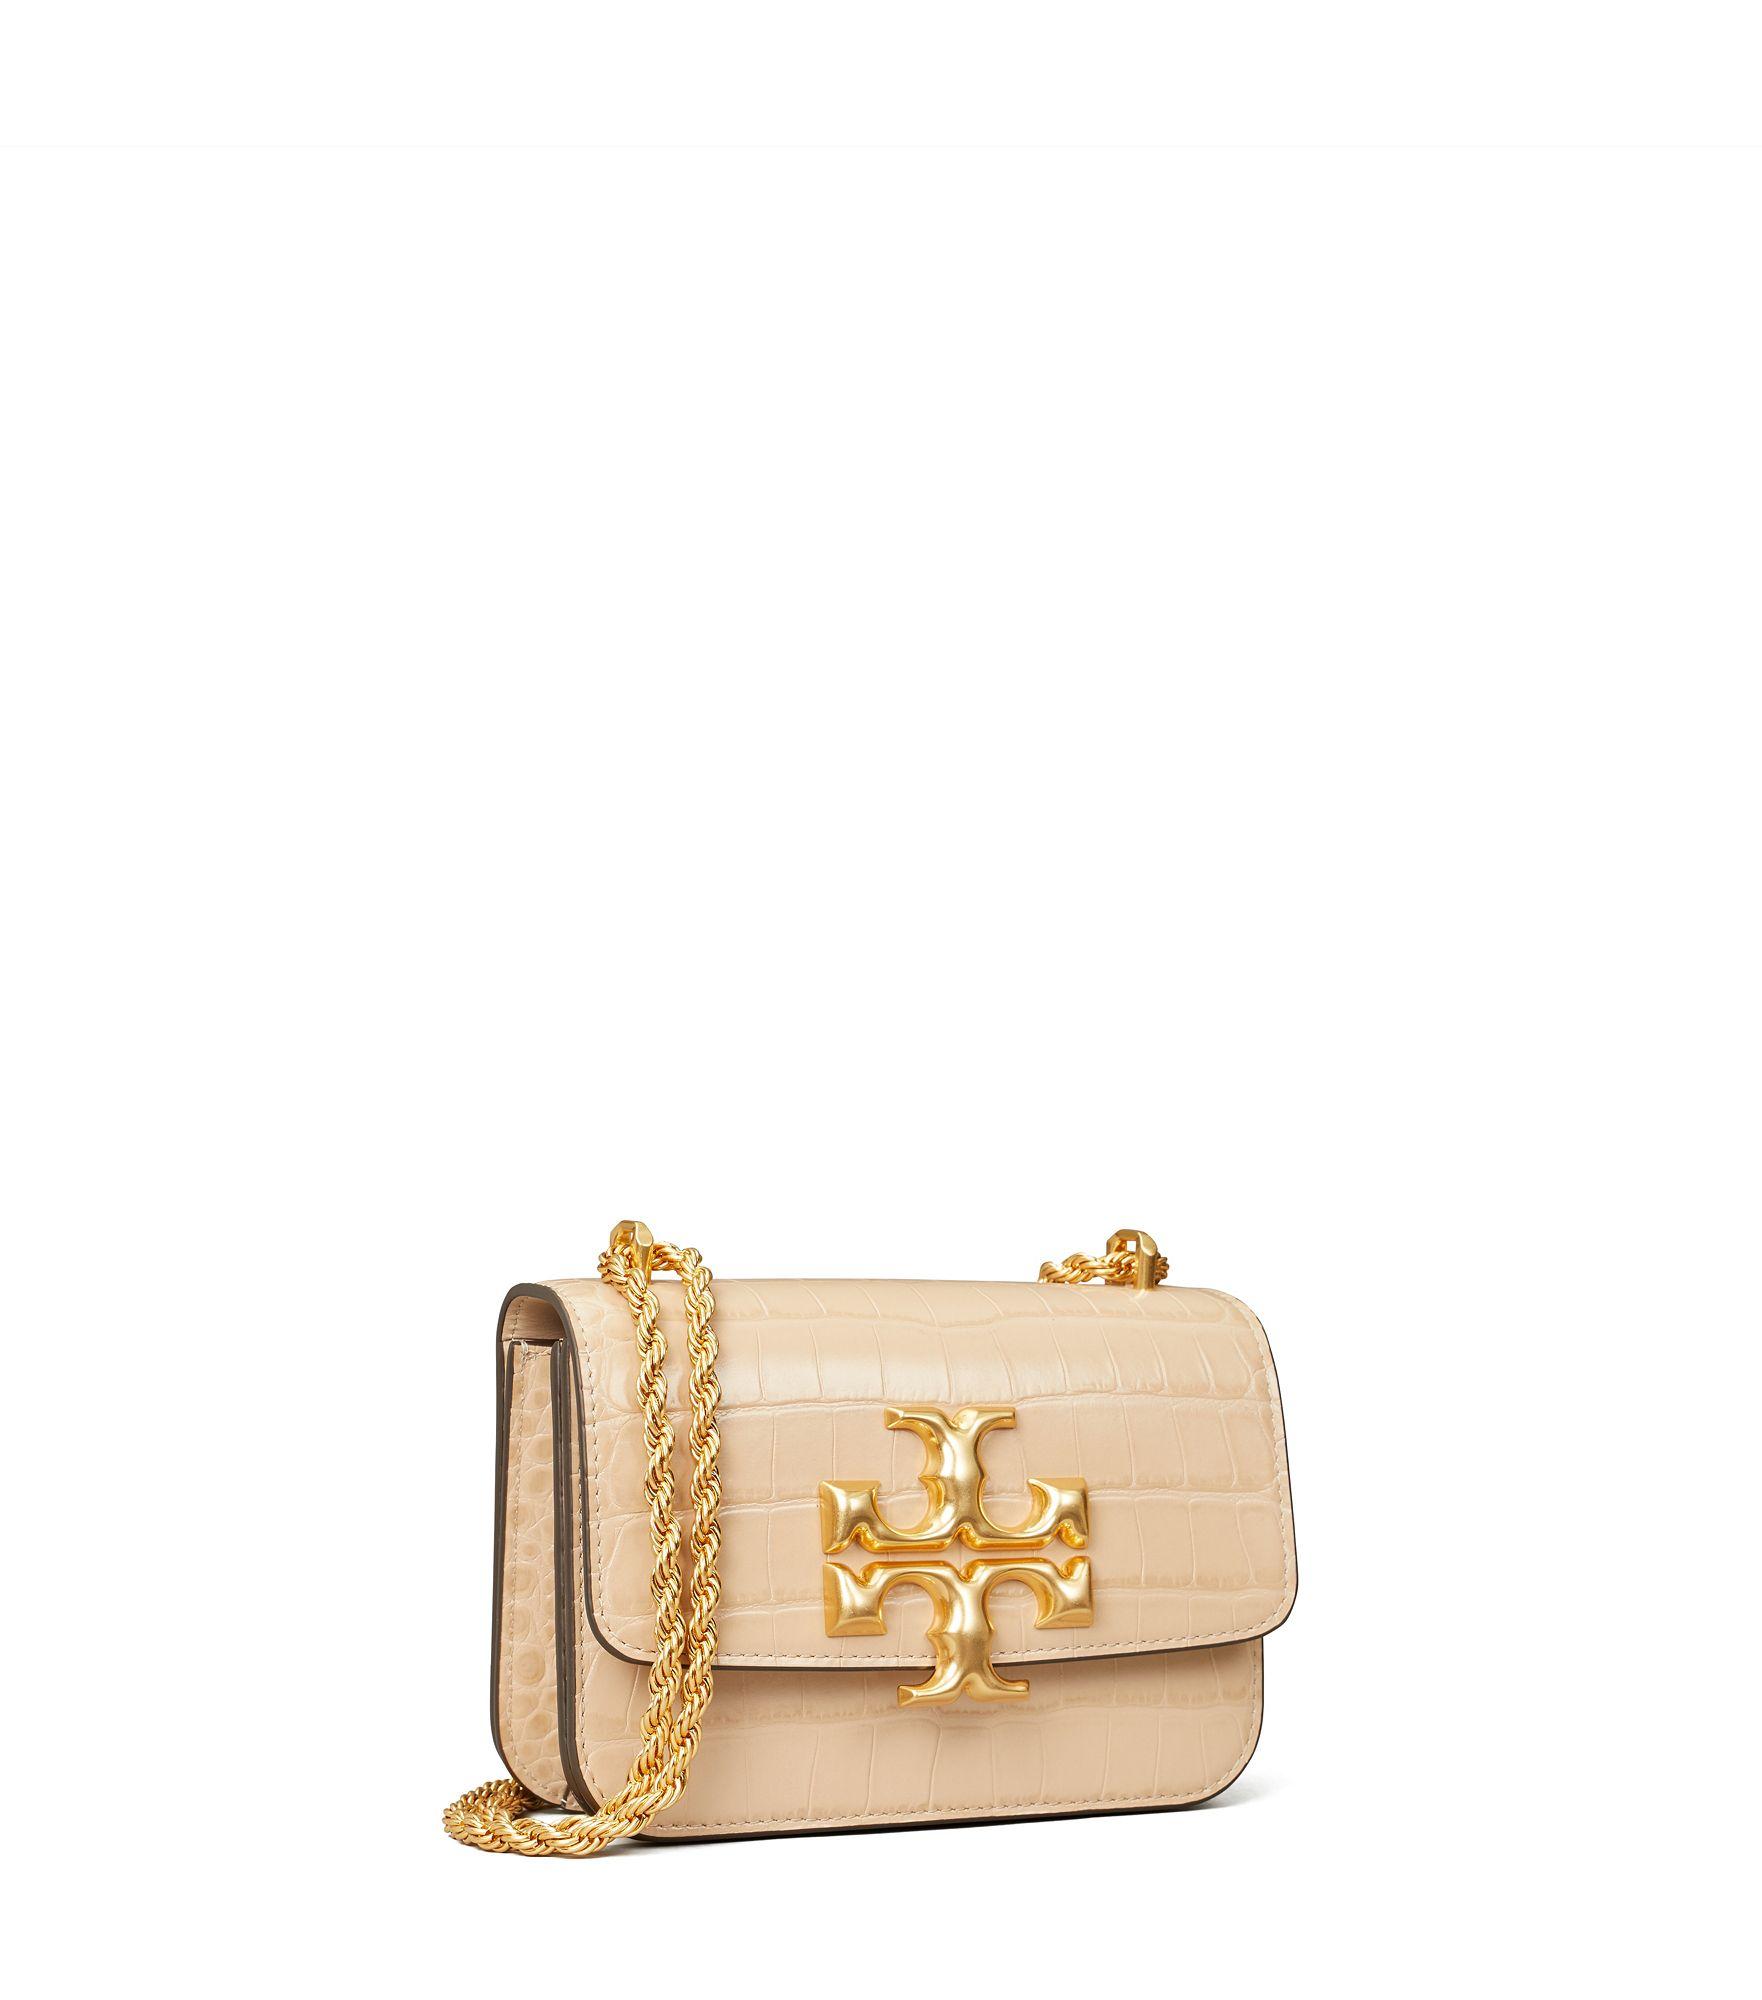 Tory Burch Eleanor Small Bag in Natural